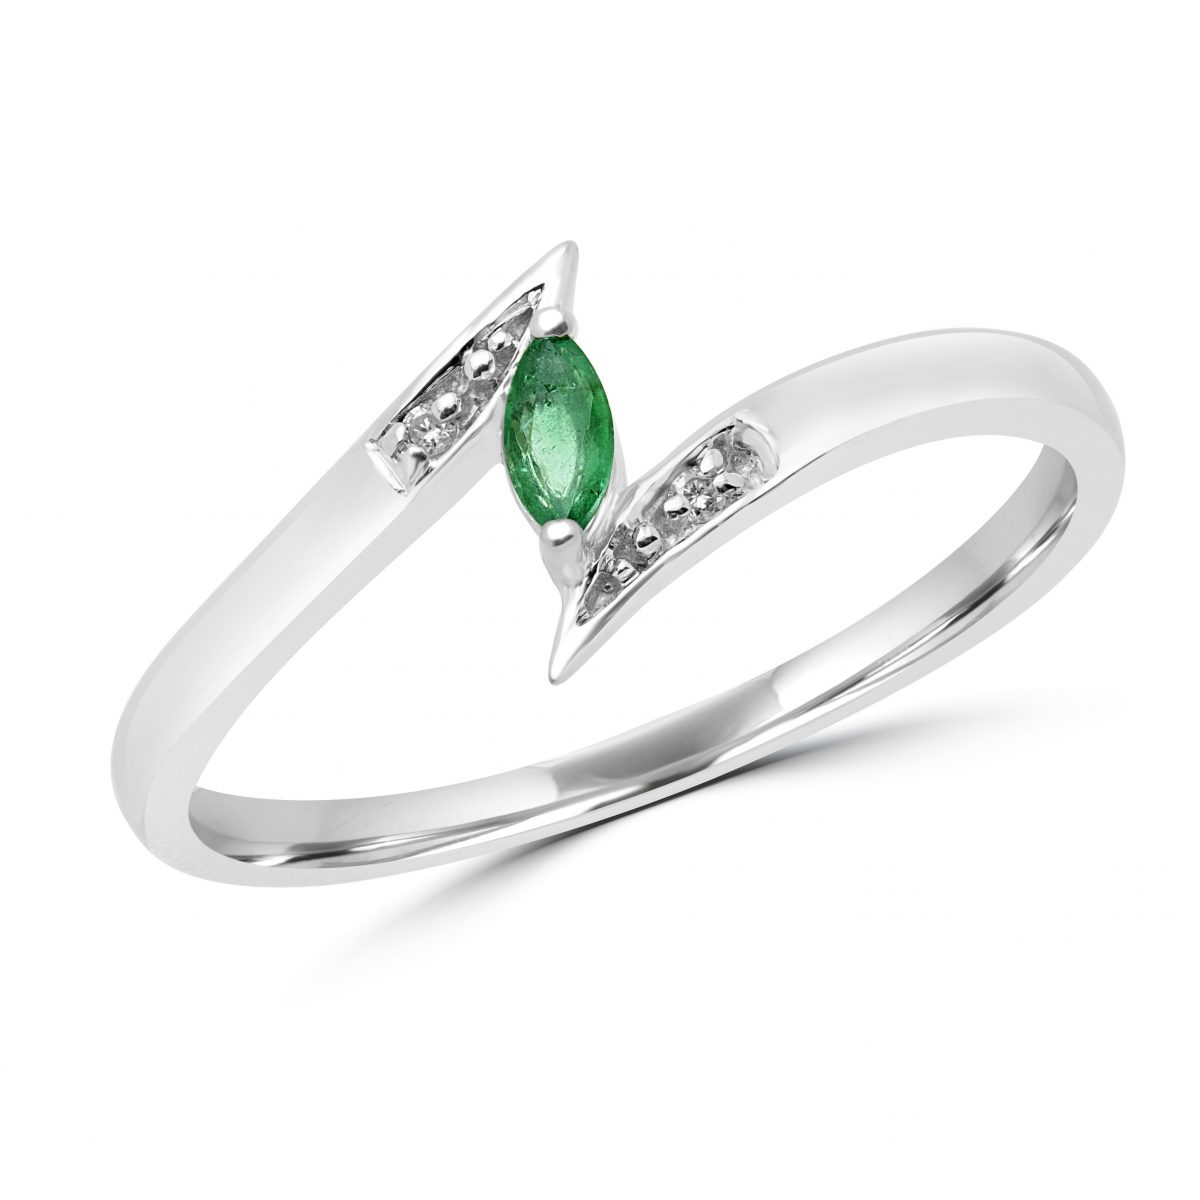 Marquise cut emerald & diamond cocktail ring in 10k white gold